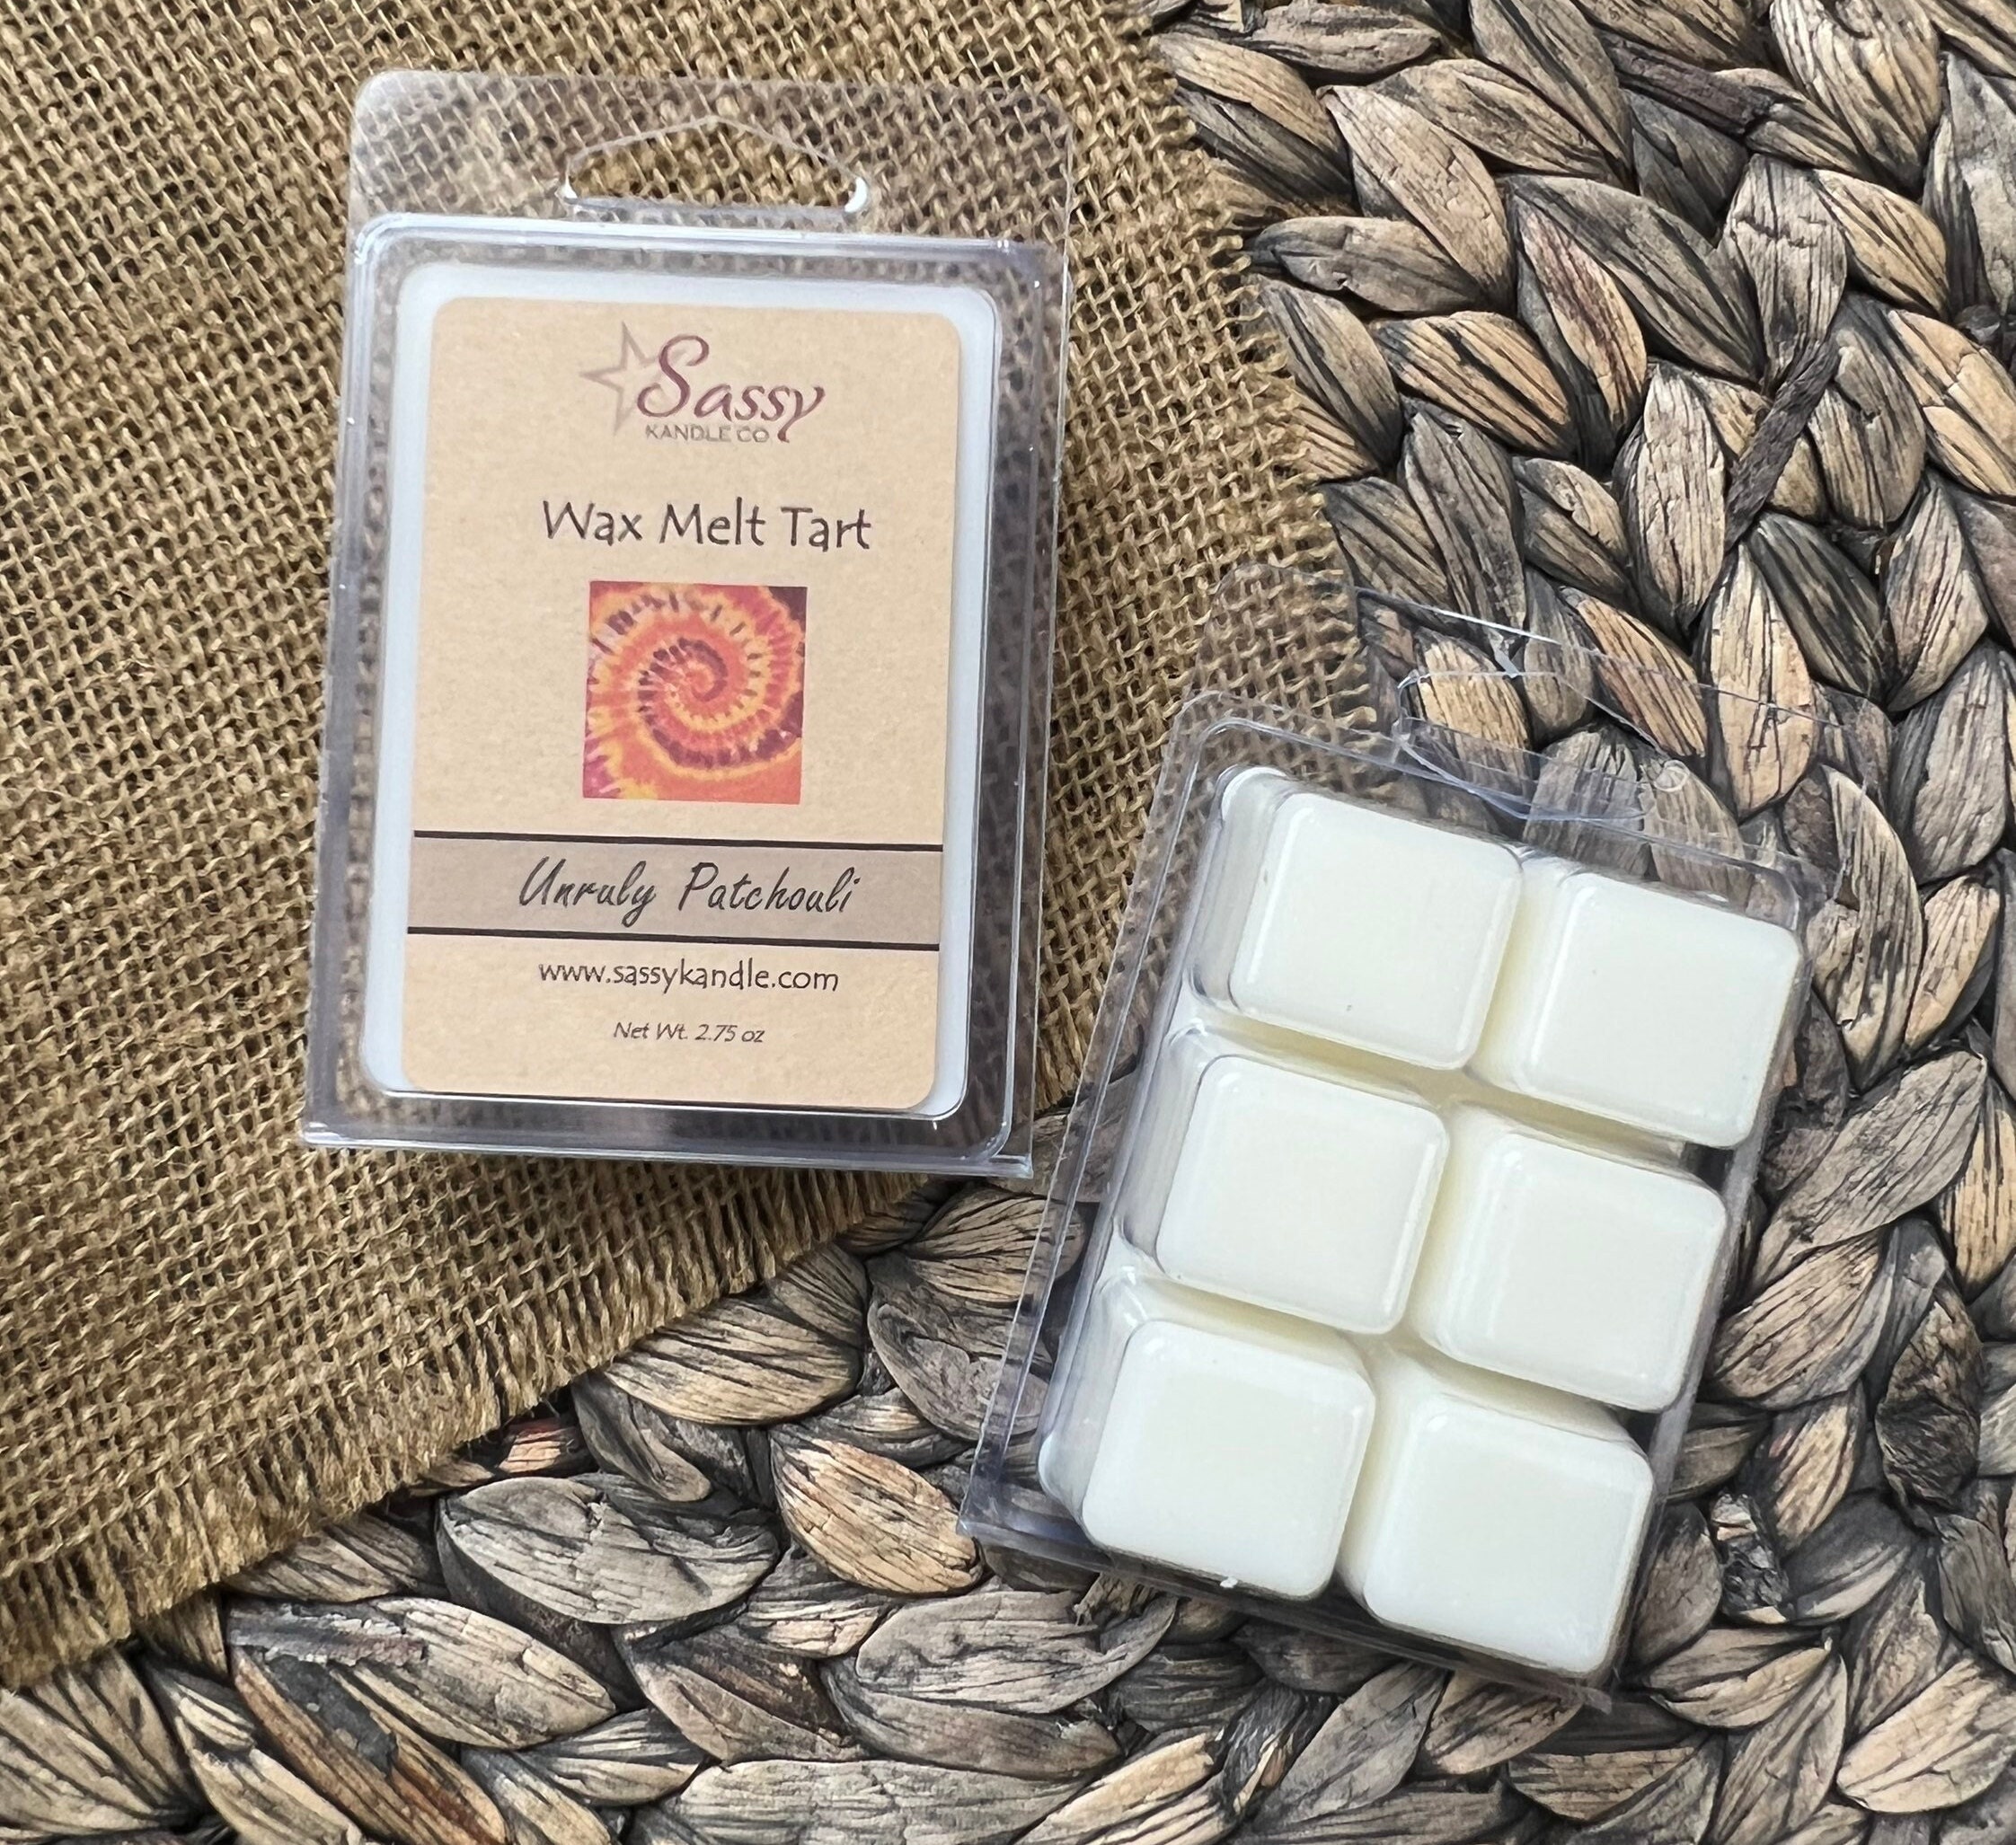 Patchouli Wax Melts Heart Shaped - 16 Highly Scented Wax Melts, Presentation Gift Box 3.2 oz Pack, Natural Candle, Soy Wax Melt Cubes Shaped As